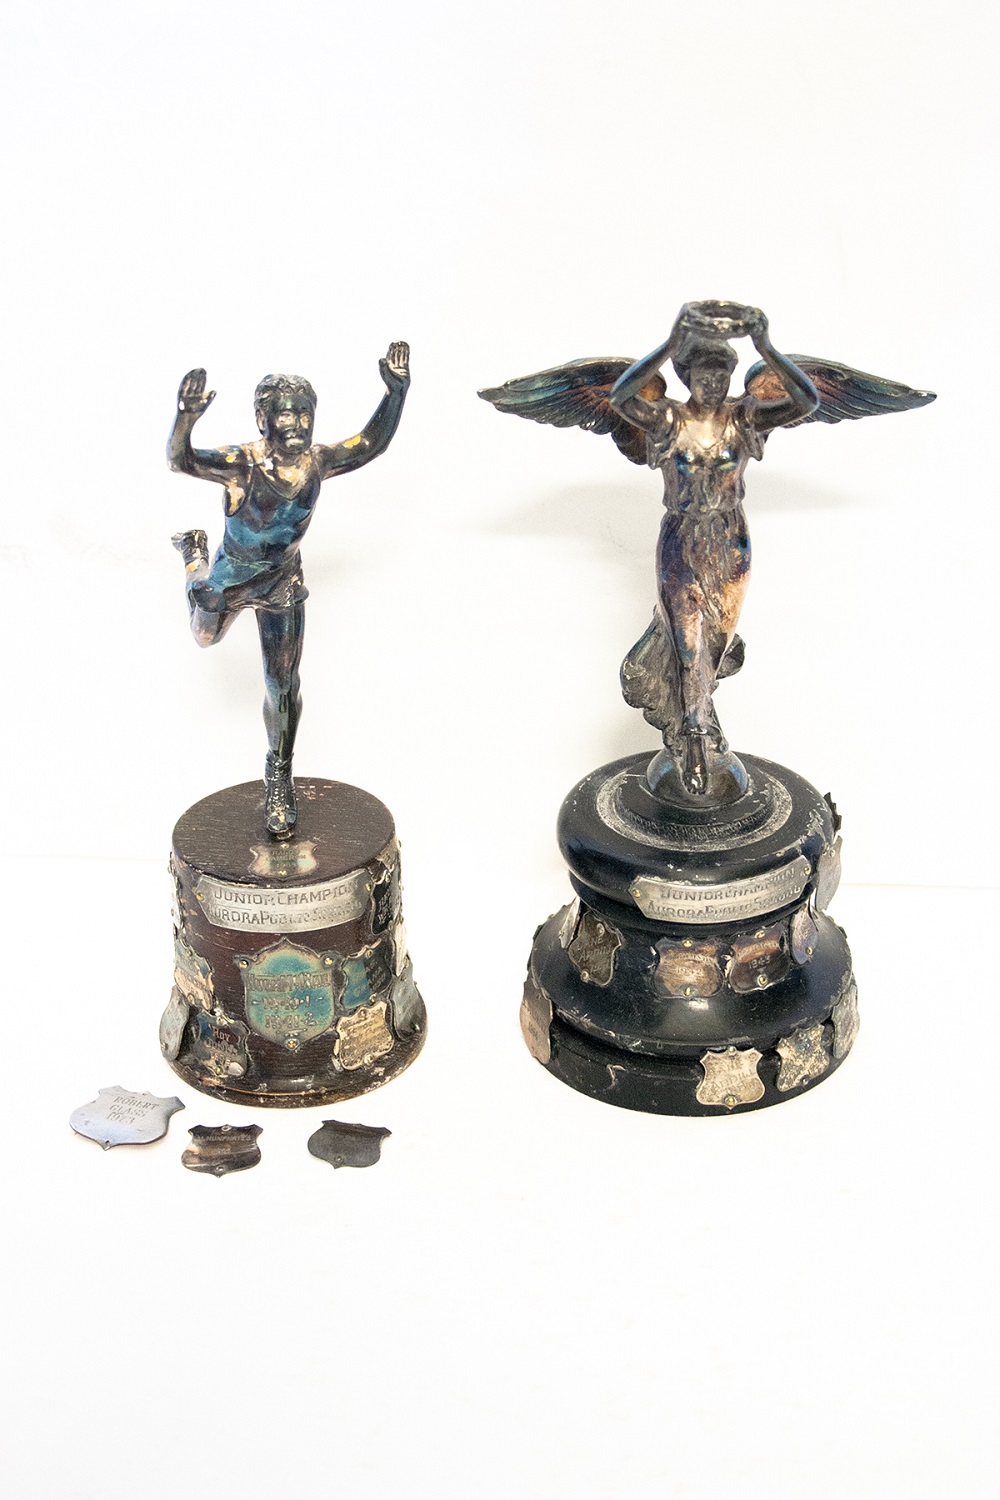 Two small silver trophies on wooden bases covered with engraved silver shields; the one at left depicts a male figure running with both arms raised; the one at right features a winged female figure in flowing dress with raised arms holding a wreath with both hands; three loose silver engraved shields sit in front of the trophy at left